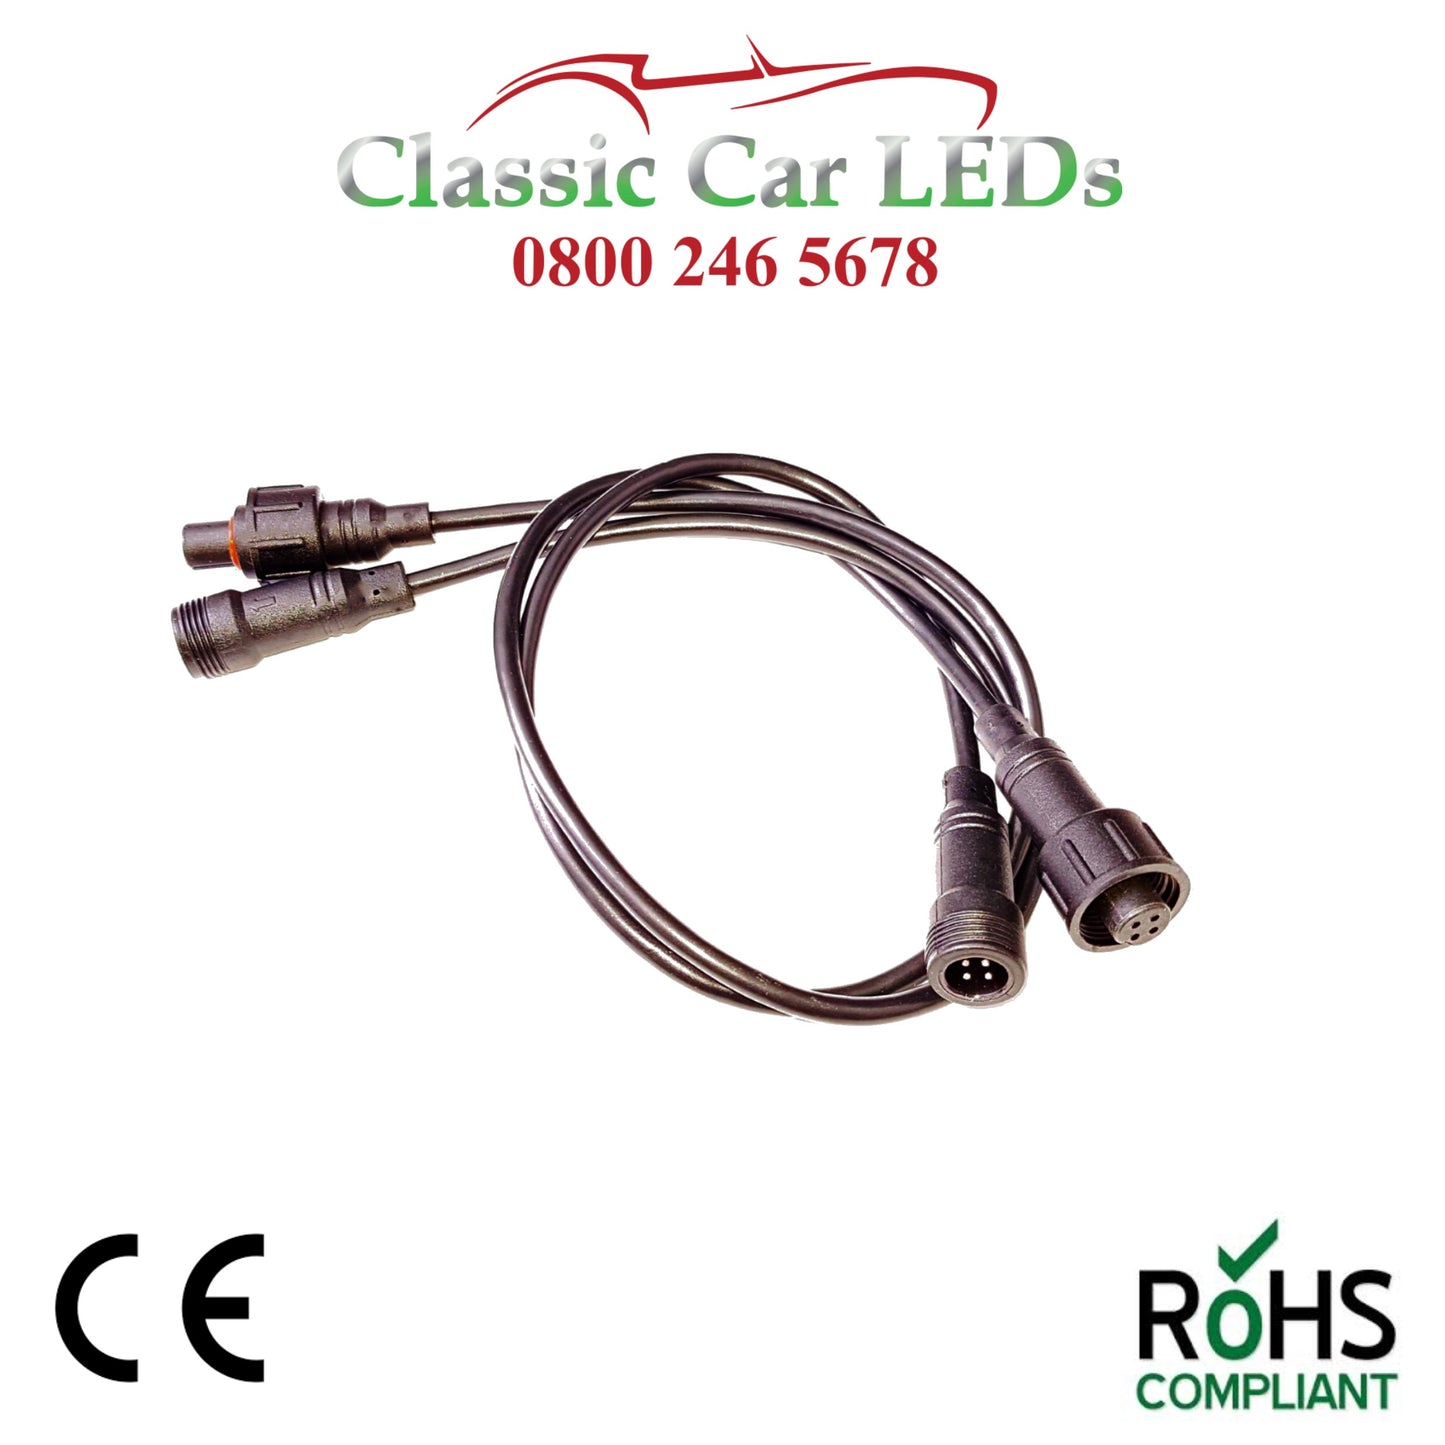 1 x 6 volt H4 / P45T LED Headlight remote mounting lead for IC Units